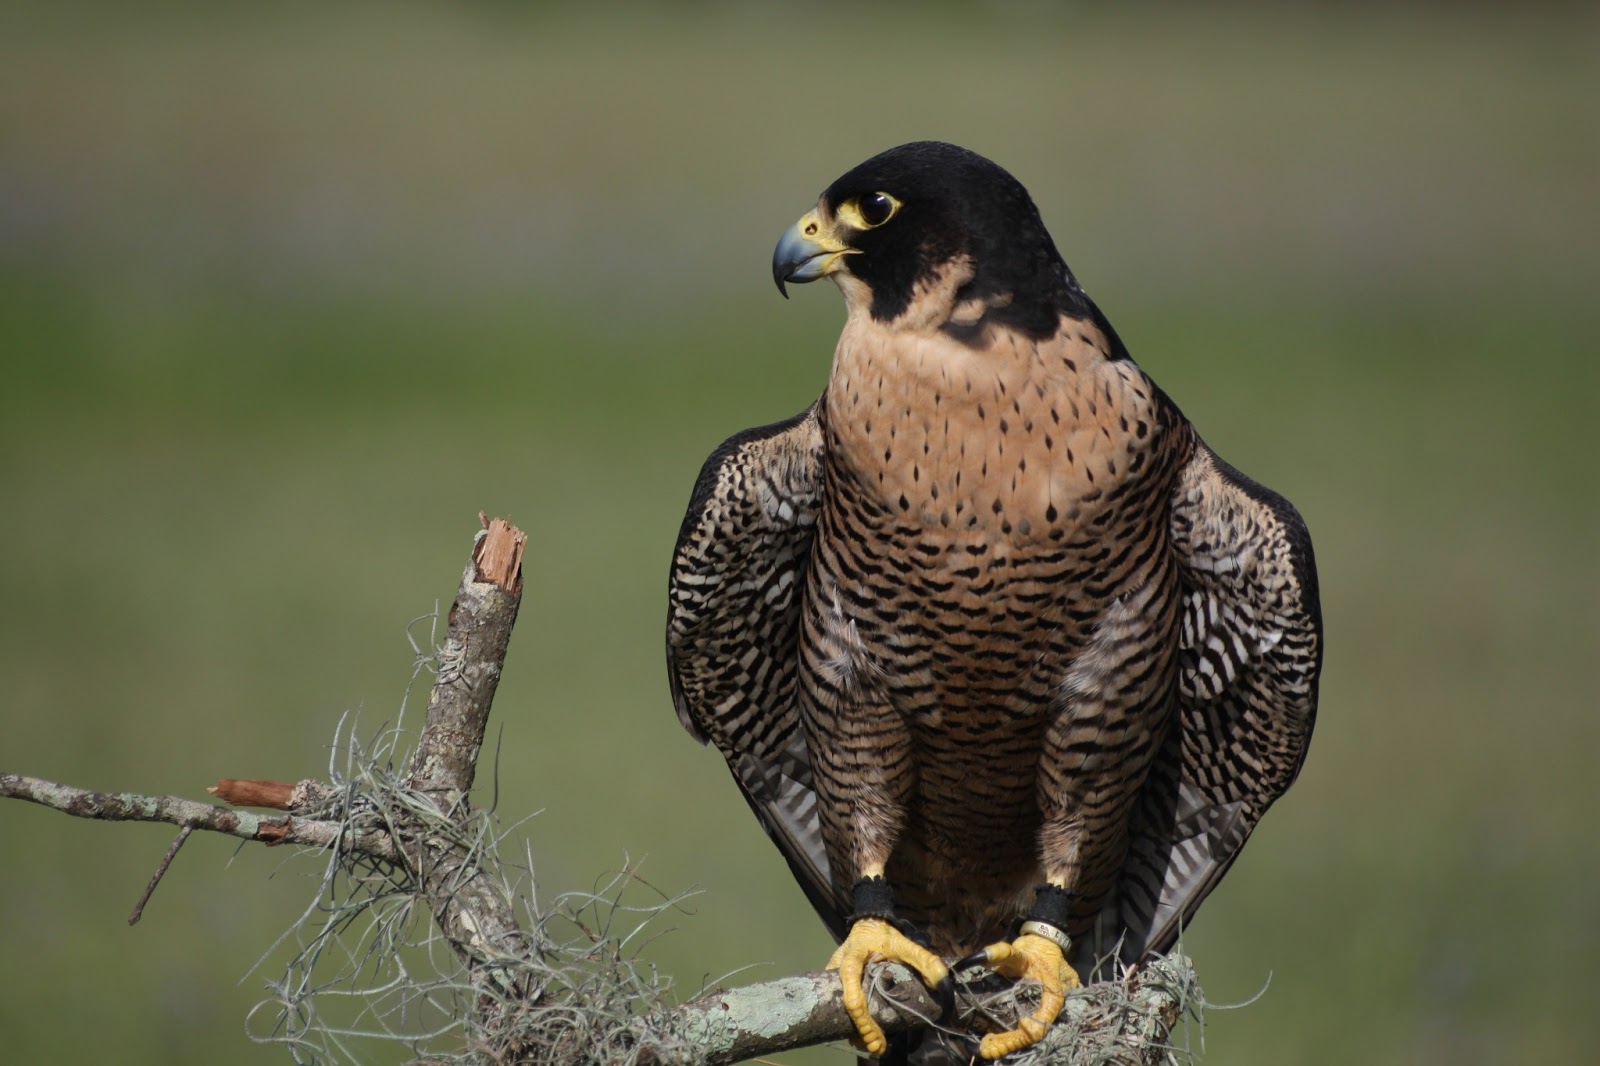 All About Animal Wildlife Peregrine Falcon Wallpaper